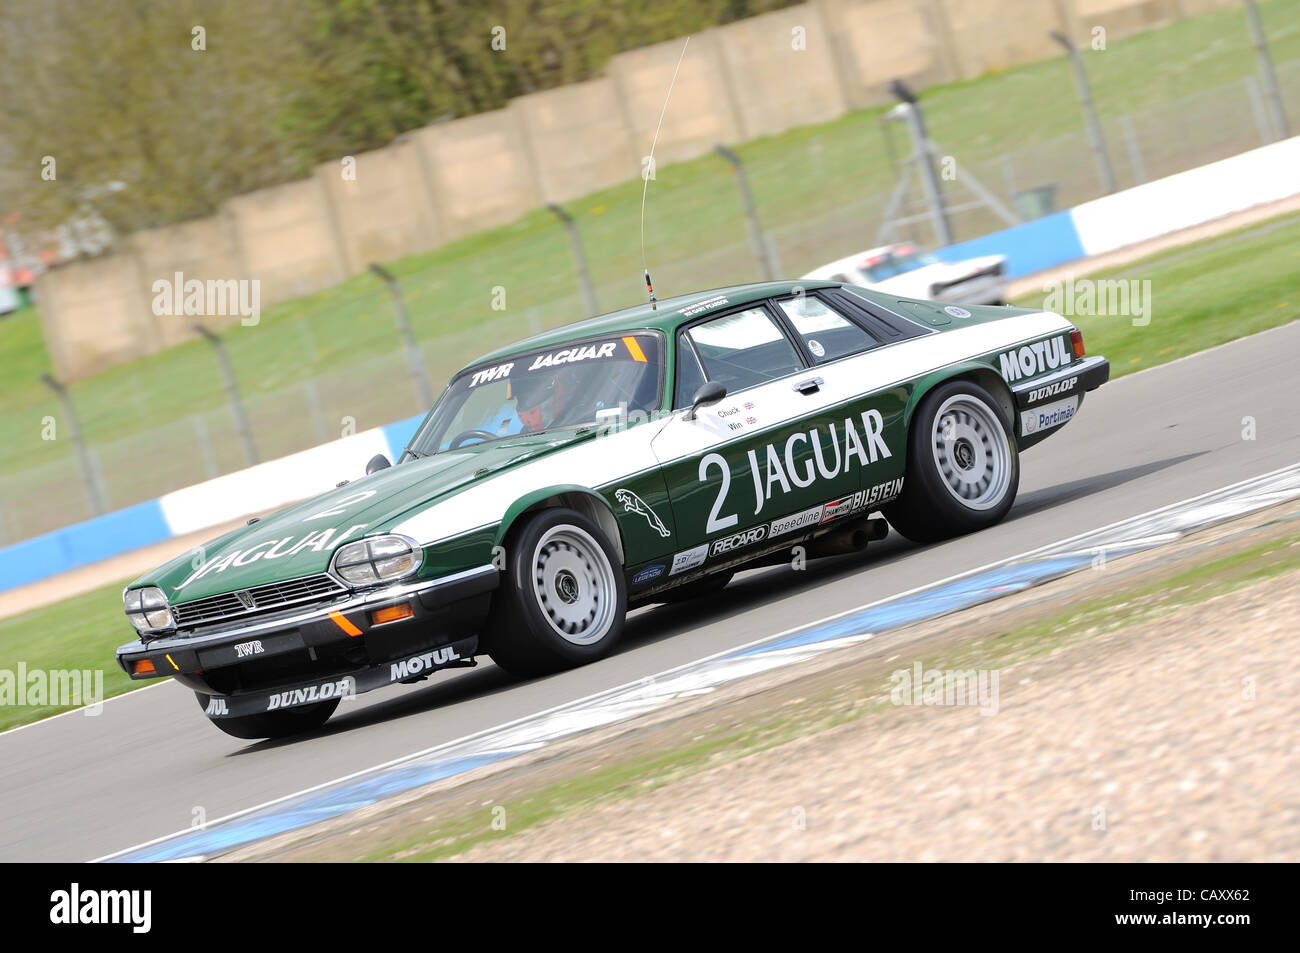 5th May 2012, Donington Park Racing Circuit, UK.  The Jaguar TWR XJS of ALex Buncombe and Gary Pearson at the Donington Historic Festival Stock Photo